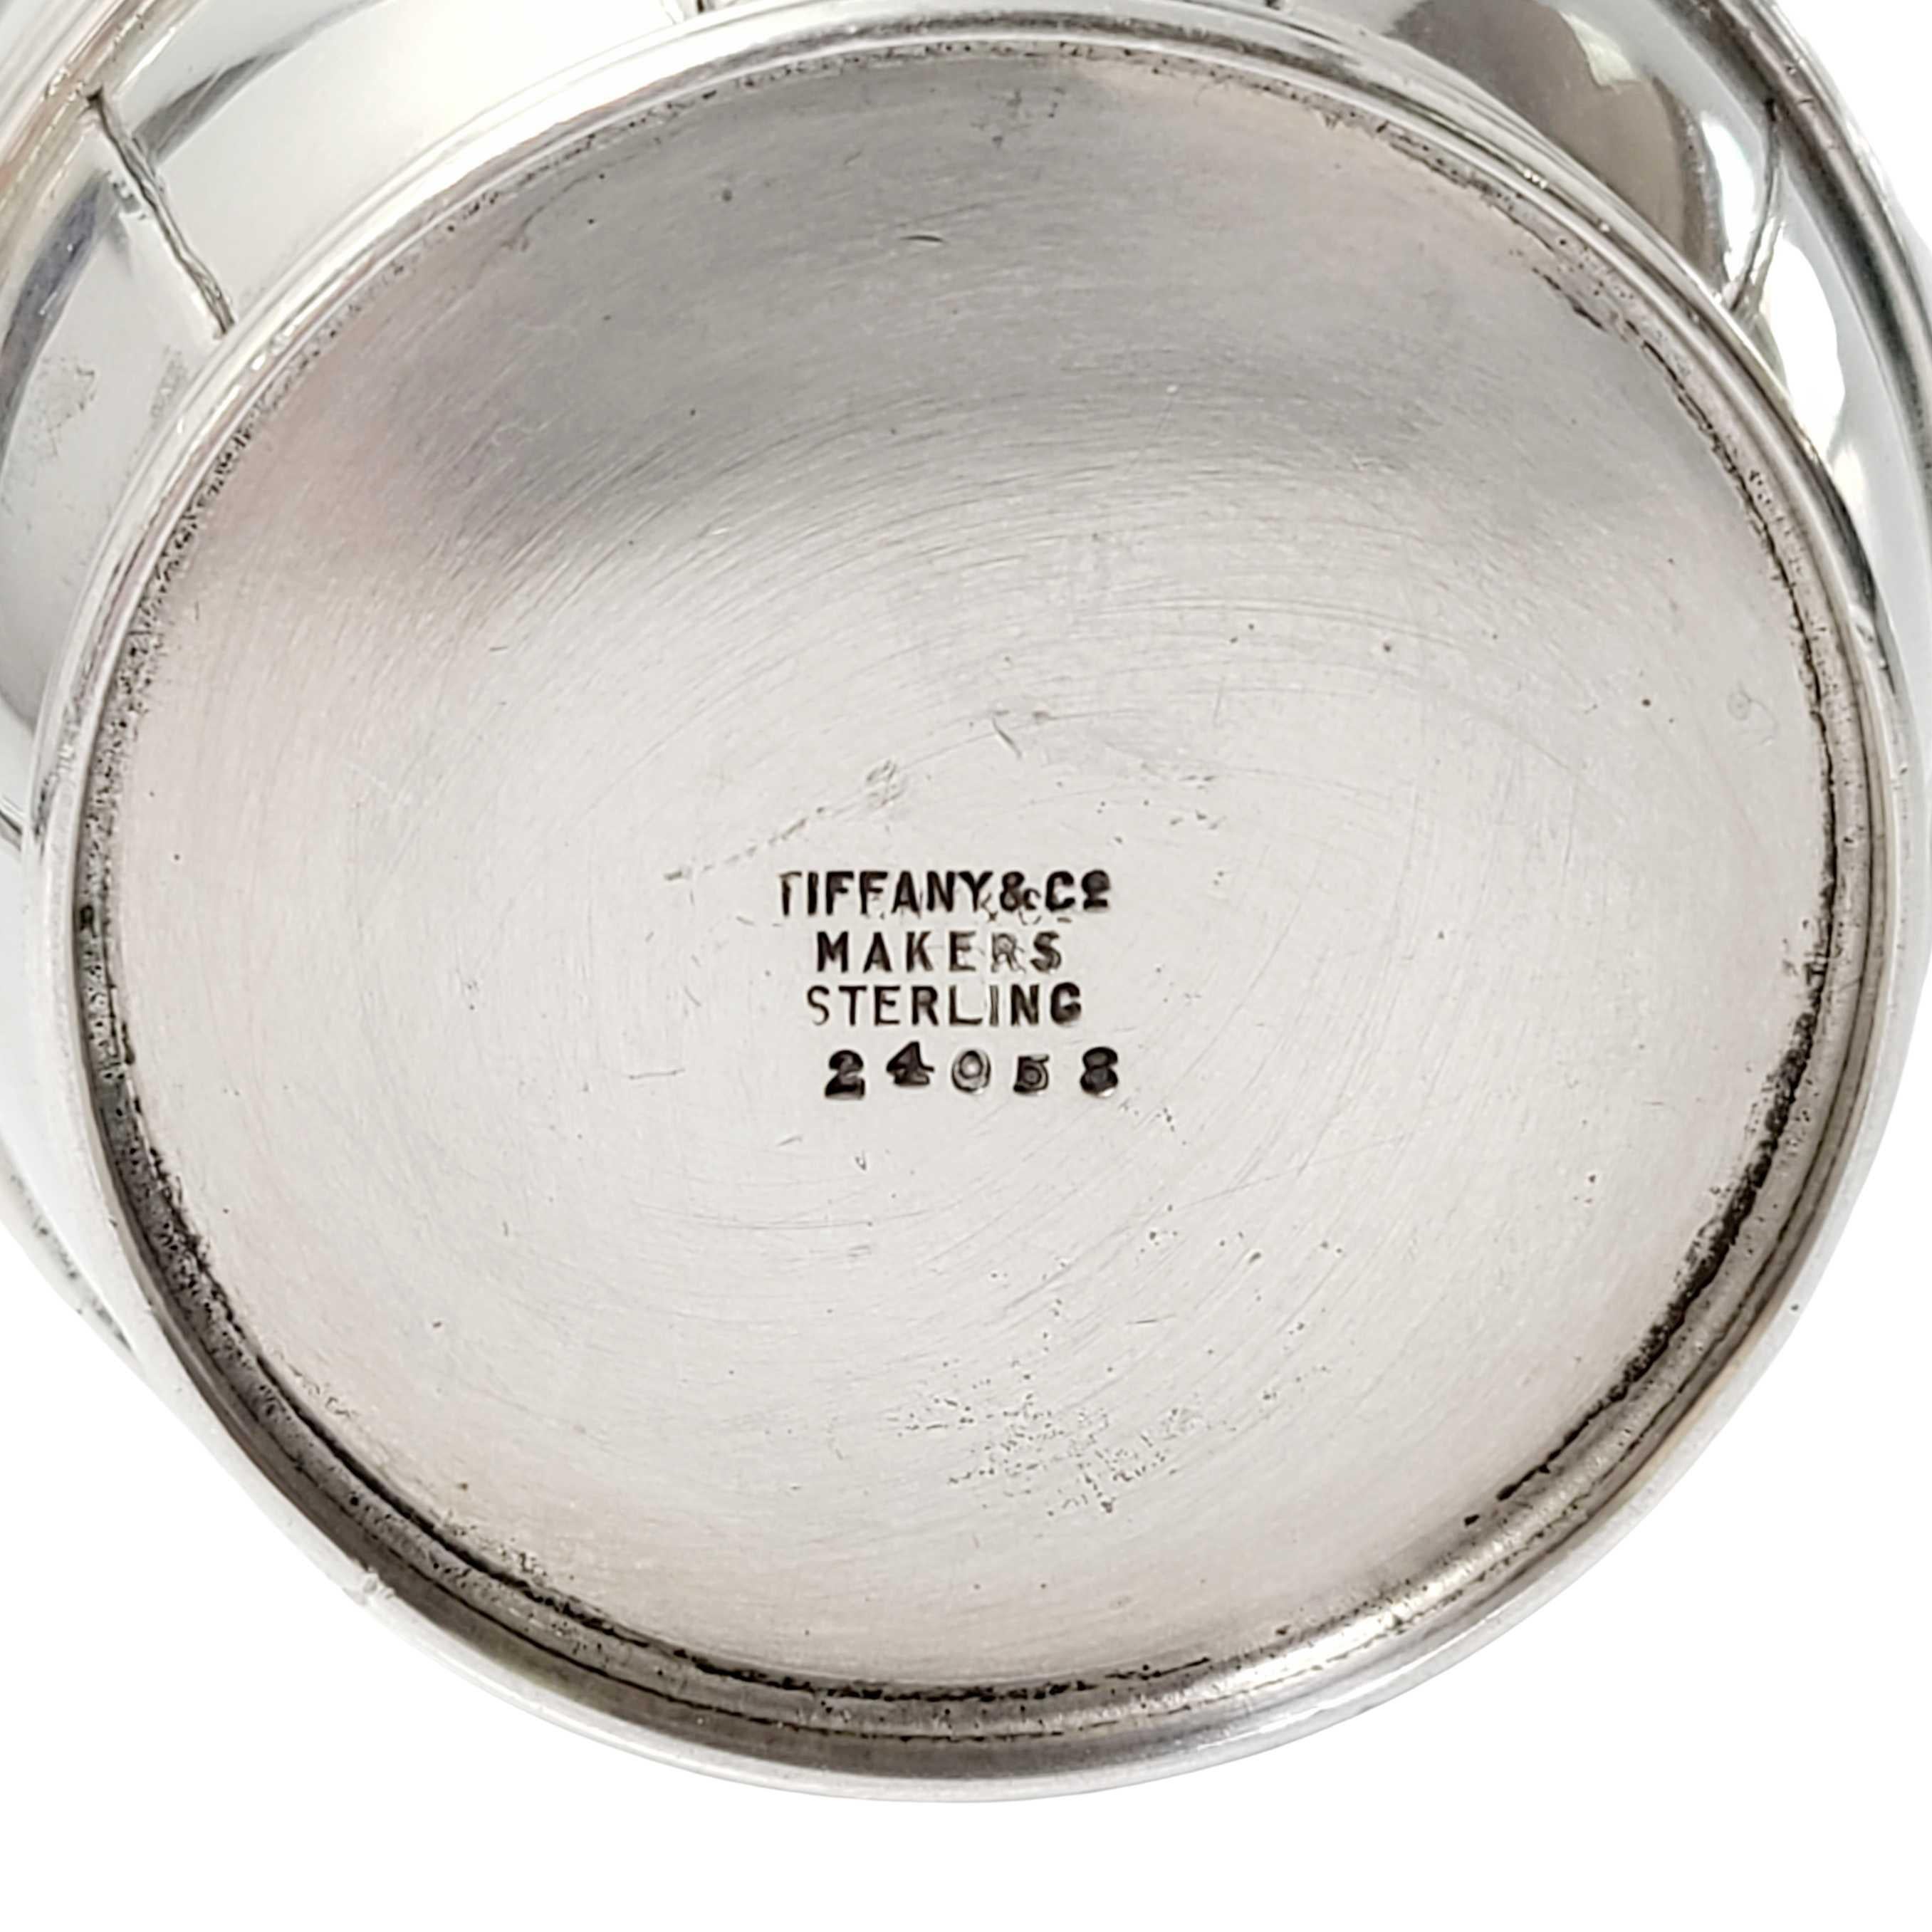 Tiffany & Co. Sterling Silver Barrel Container 4